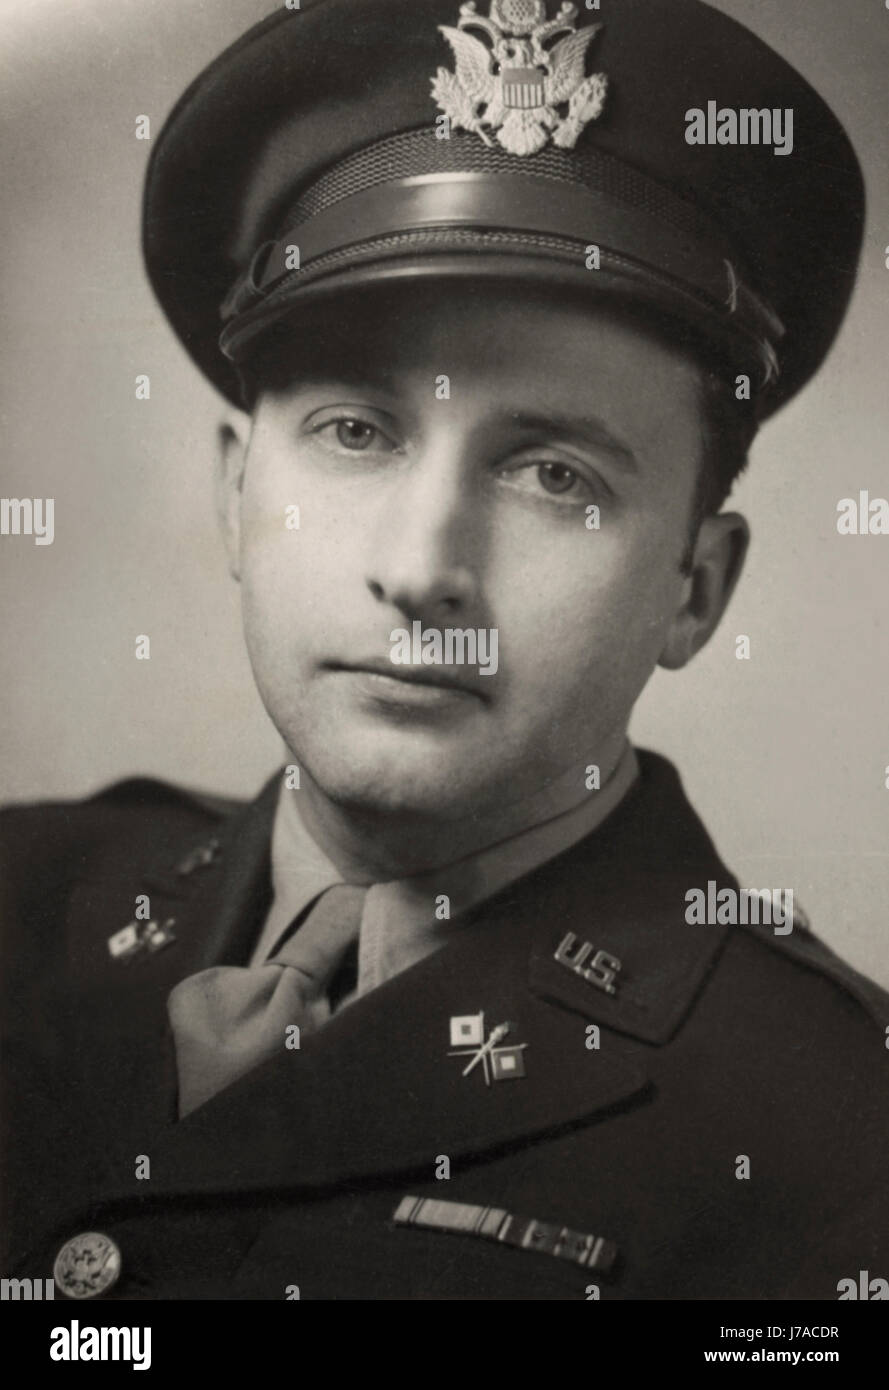 Head-and-shoulders portrait of William R. Wilson in U.S. Army uniform, 1944. Stock Photo